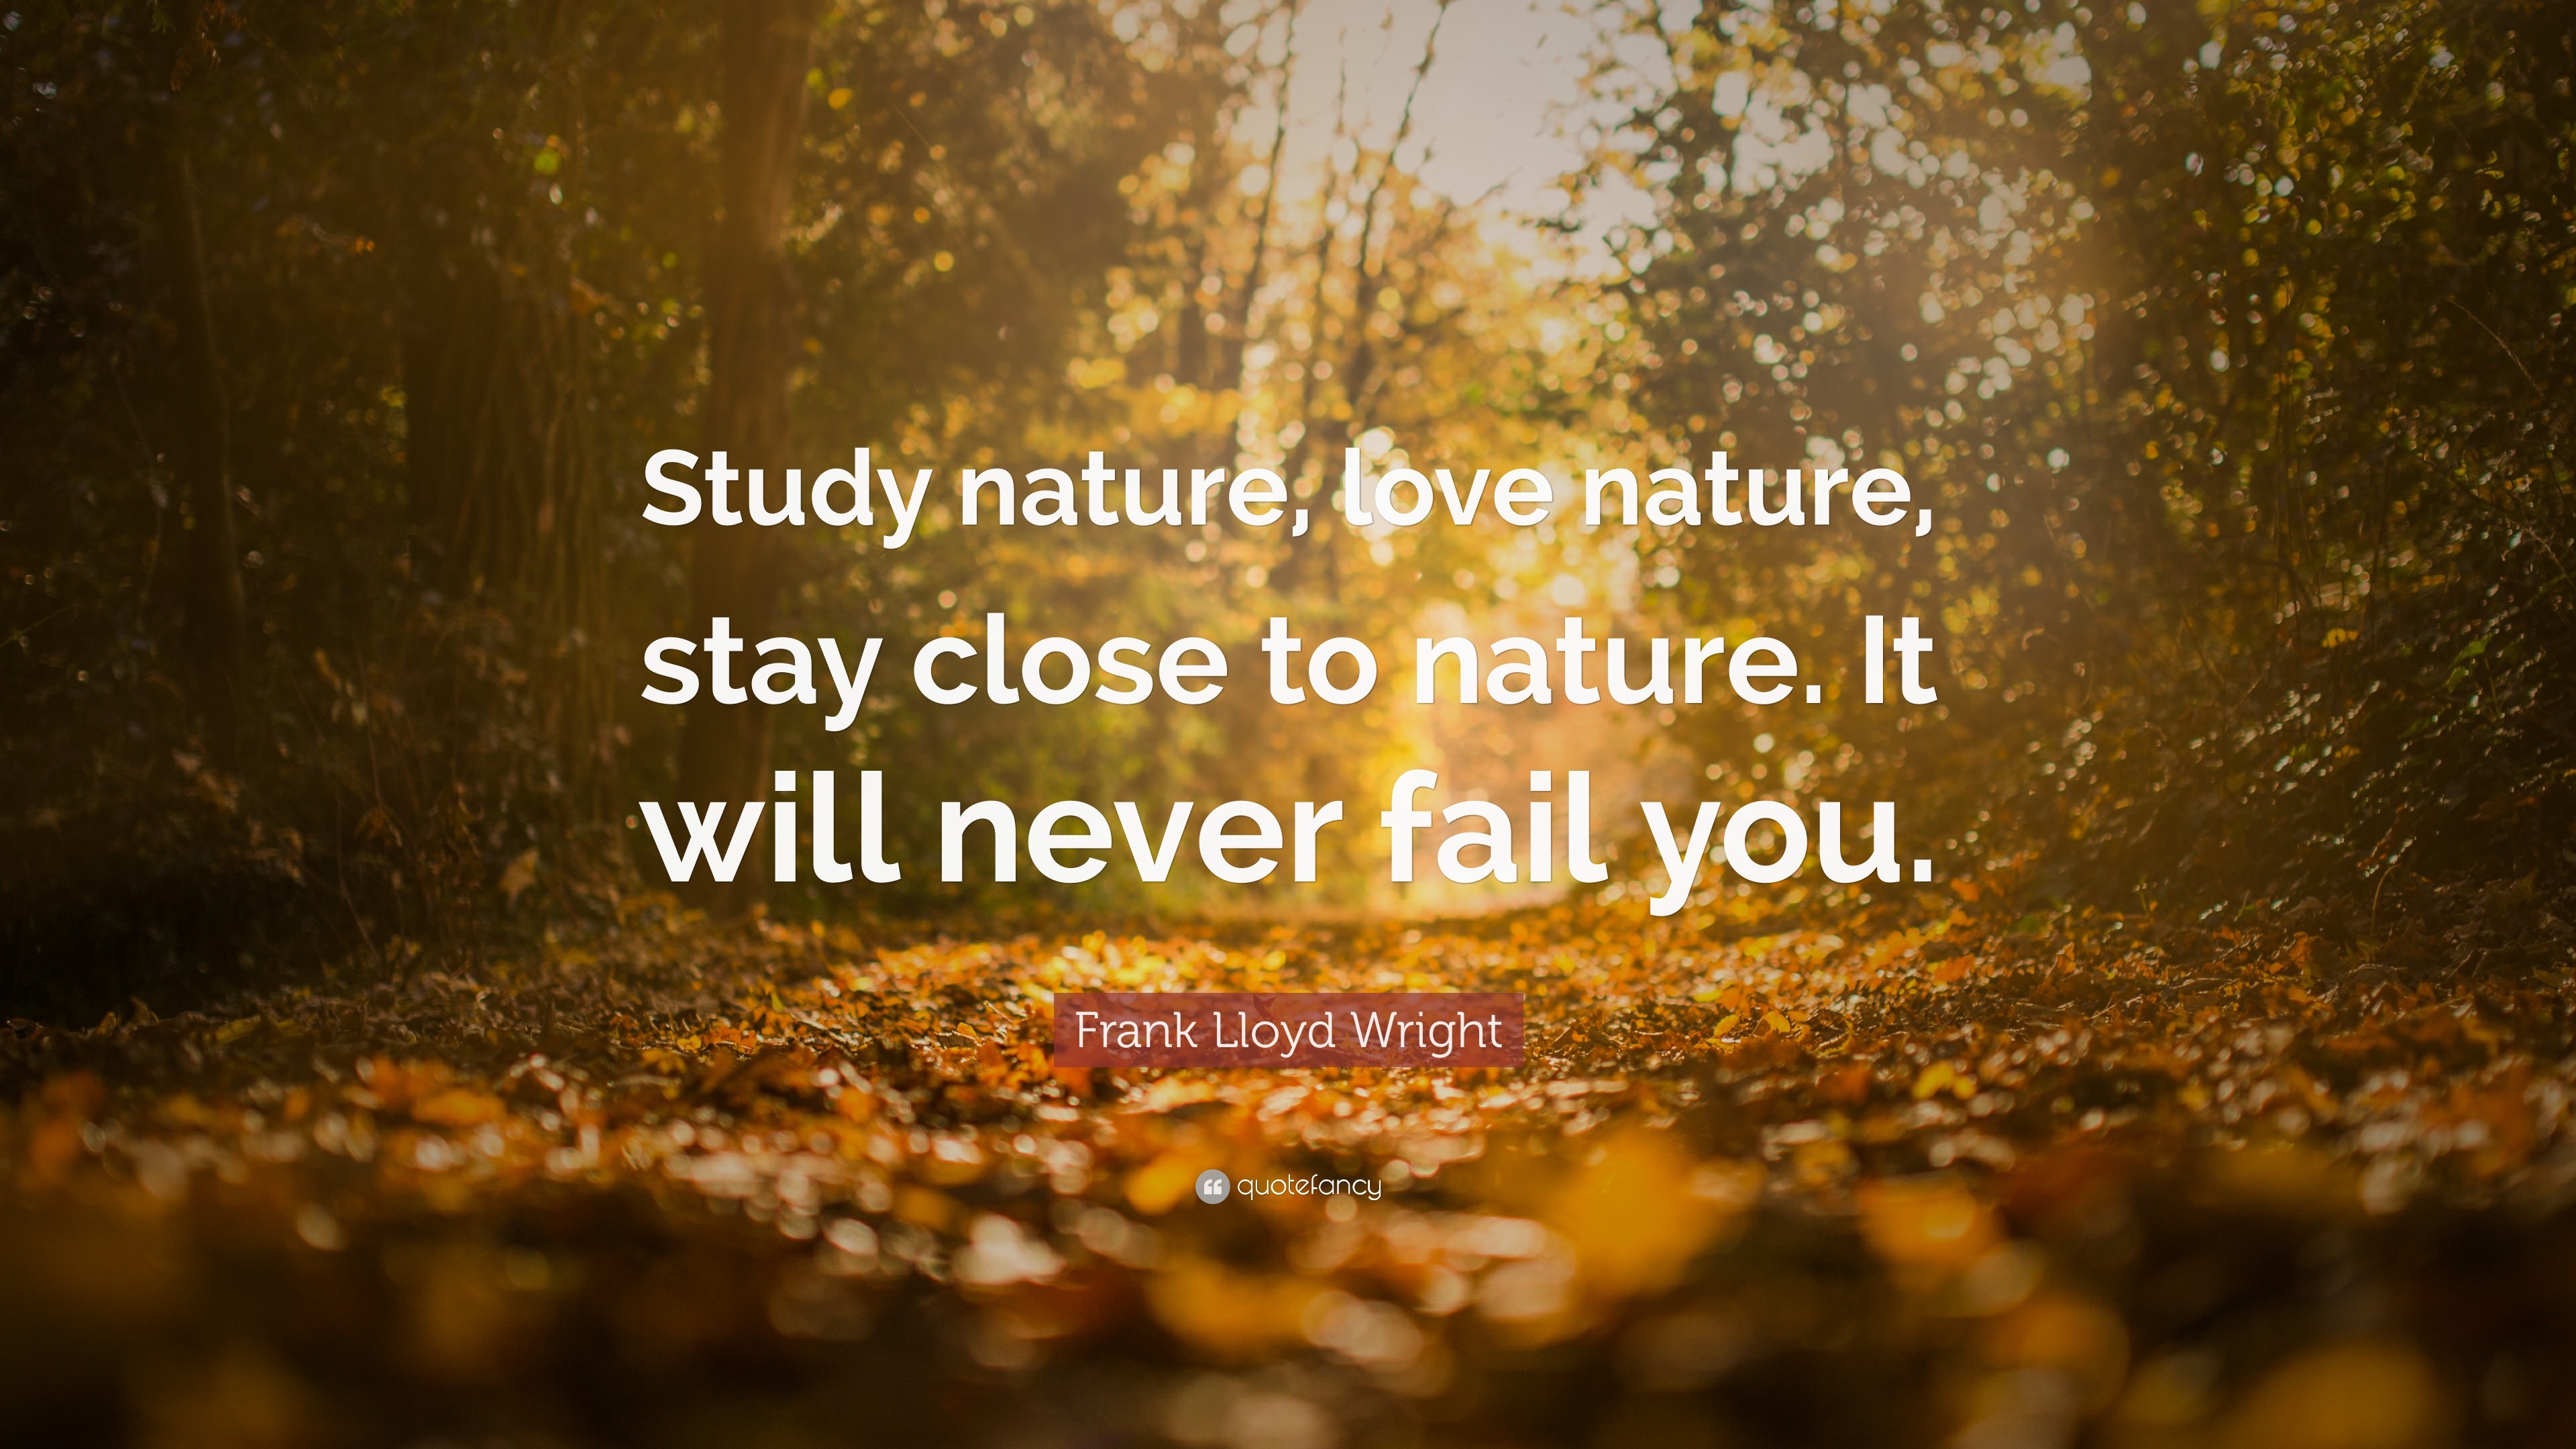 3840x2160 Frank Lloyd Wright Quote: “Study nature, love nature, stay close to nature